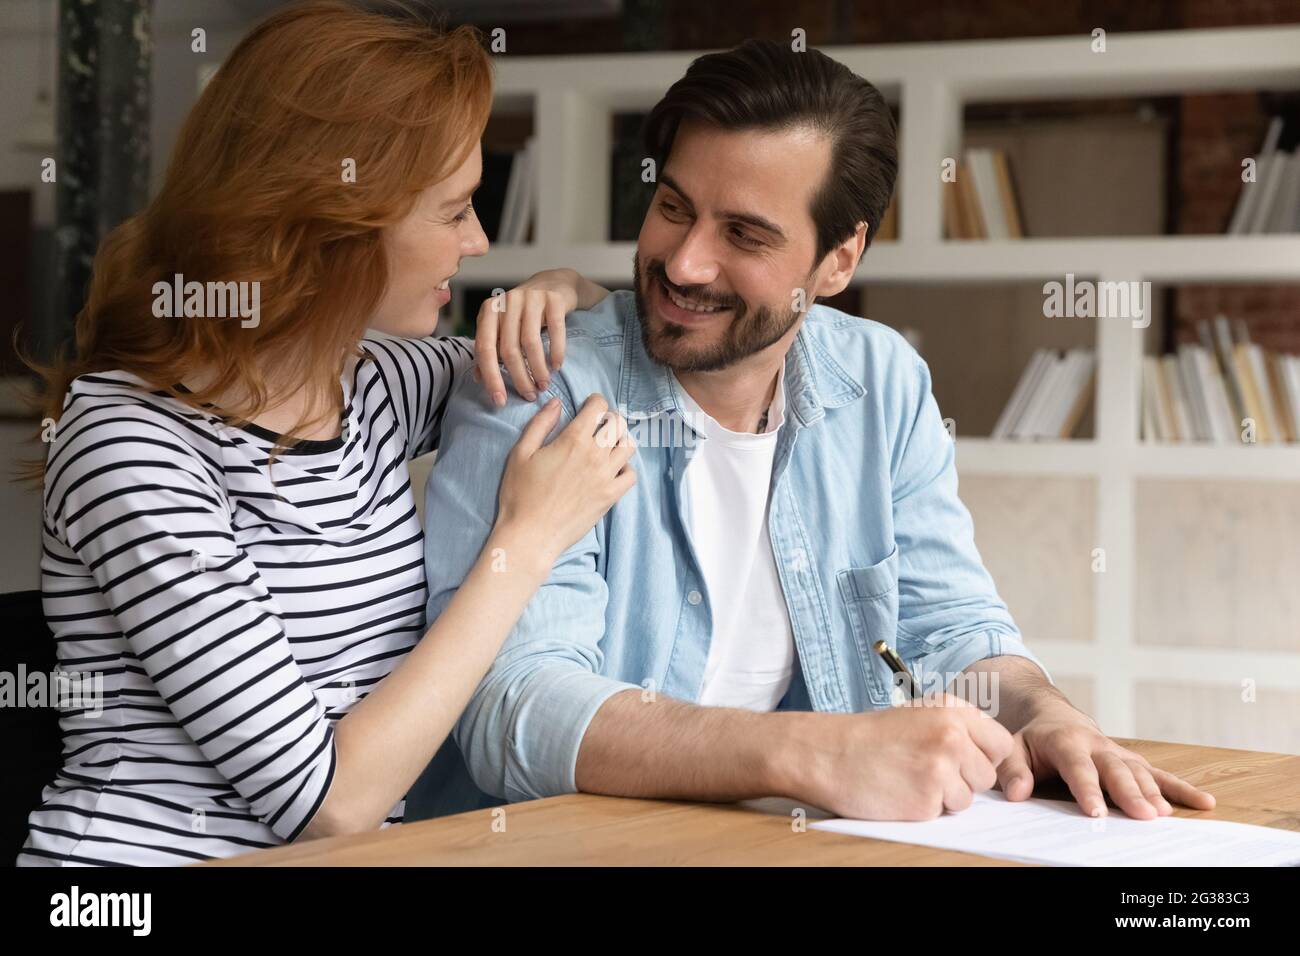 Happy bonding young family couple discussing offer, signing contract. Stock Photo